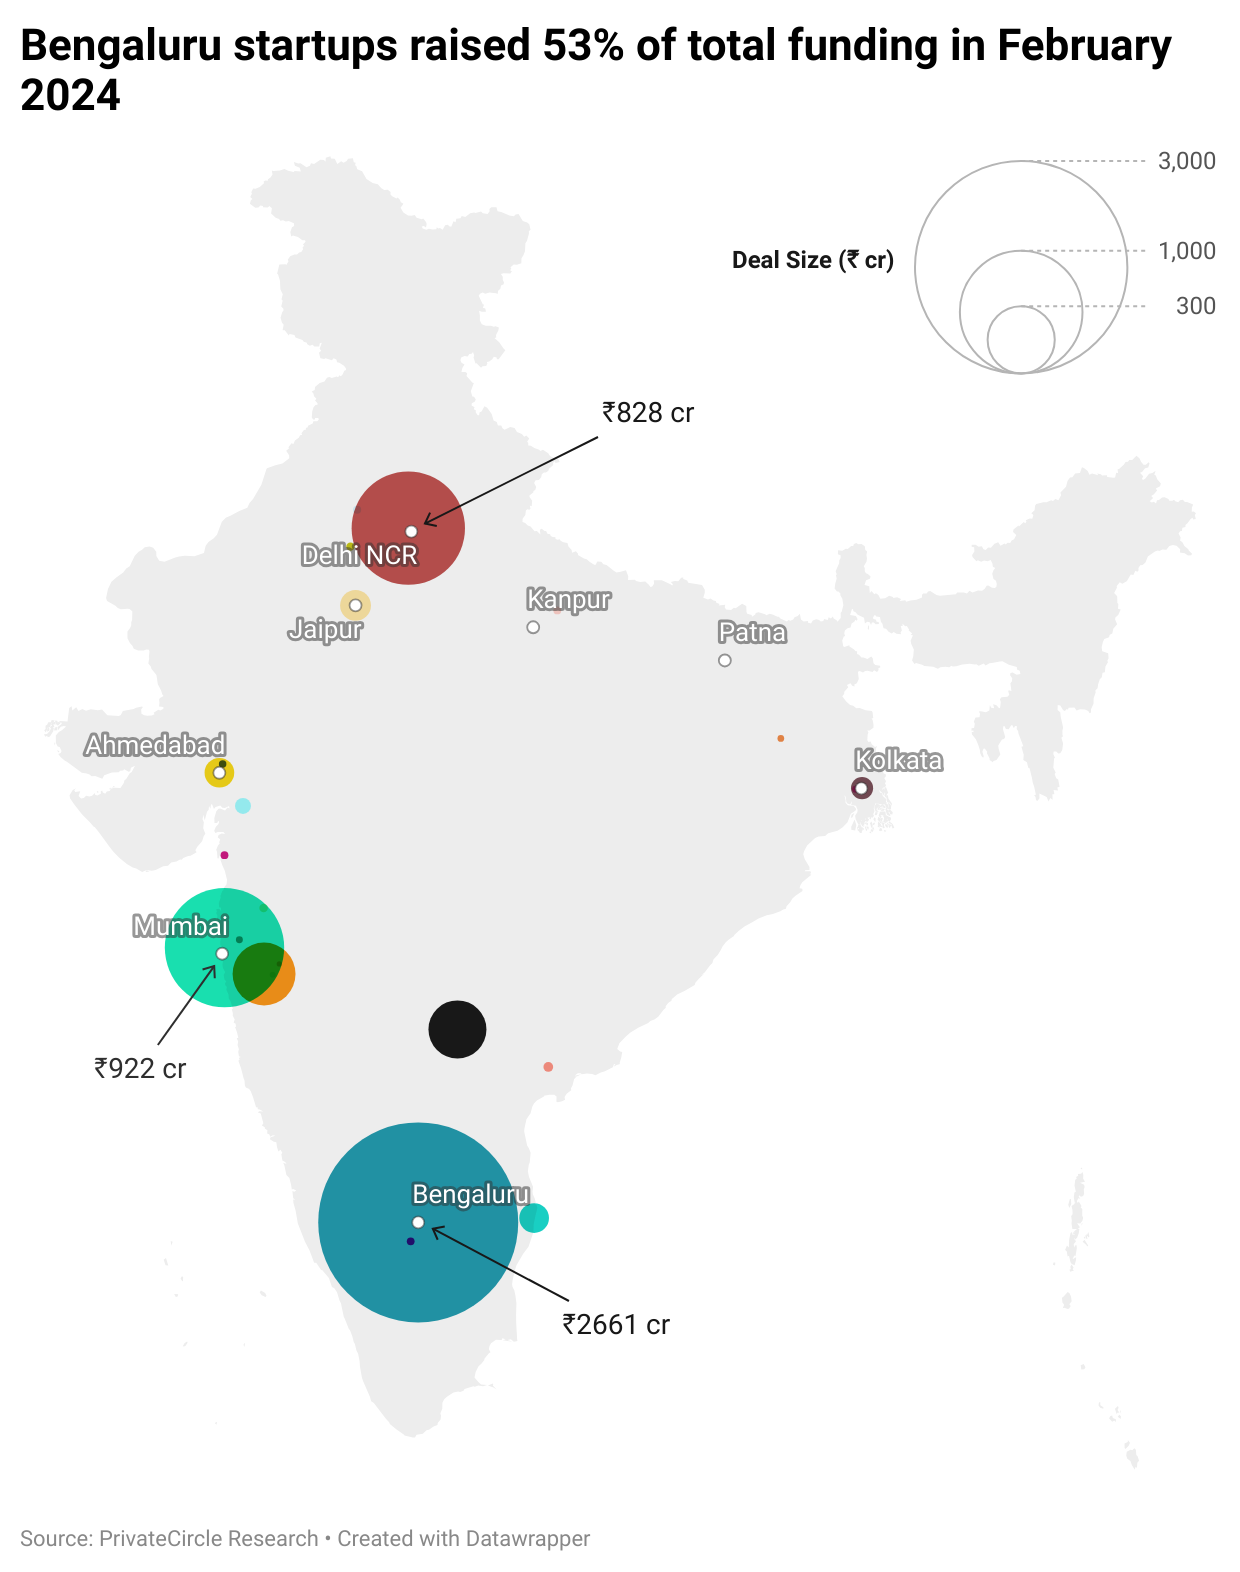 Bengaluru startups raised 53% of total funding in February 2024

Bengaluru, Mumbai and Delhi NCR were the top 3 cities this month (February, 2024) by the total value of funding raised.